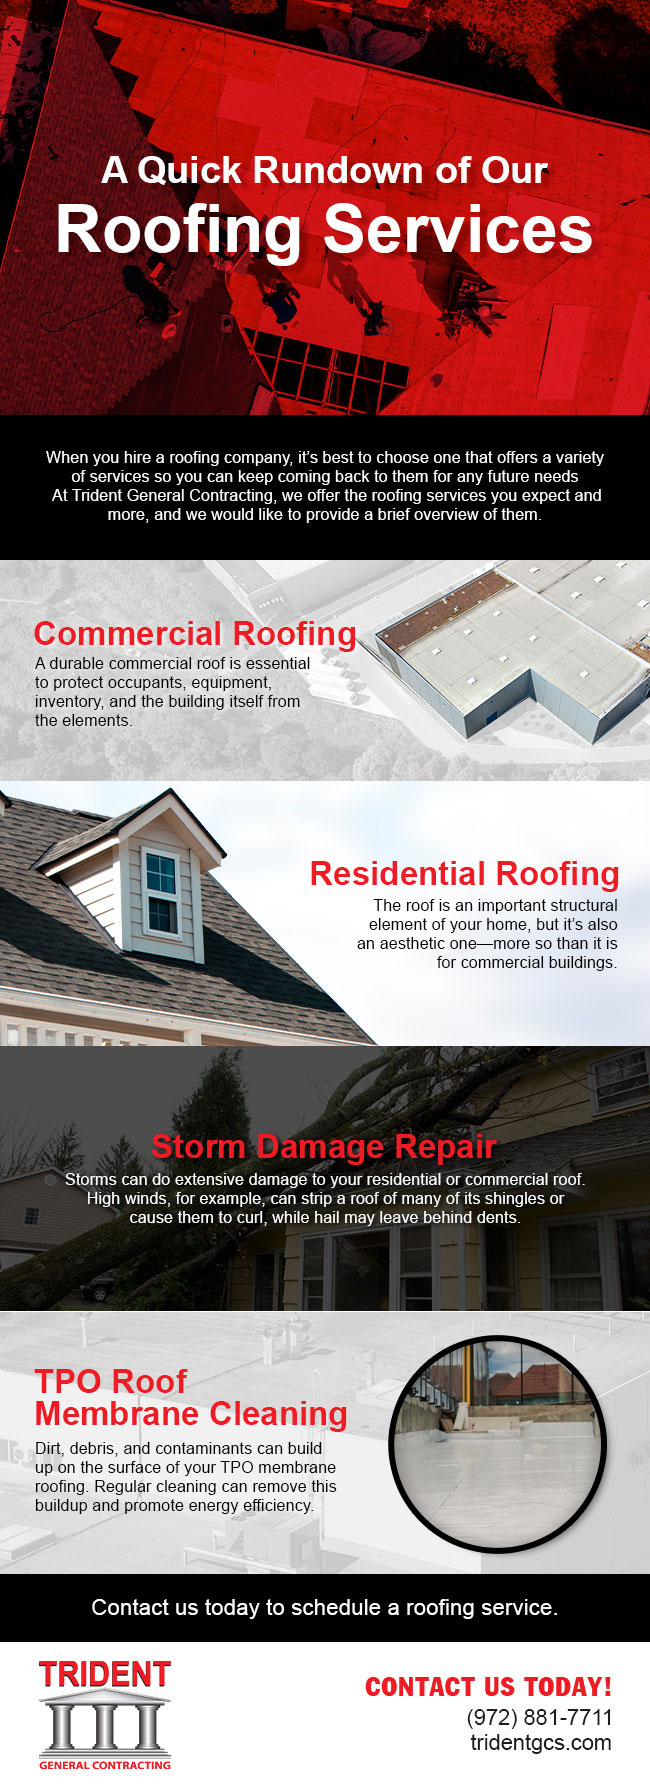 A Quick Rundown of Our Roofing Services